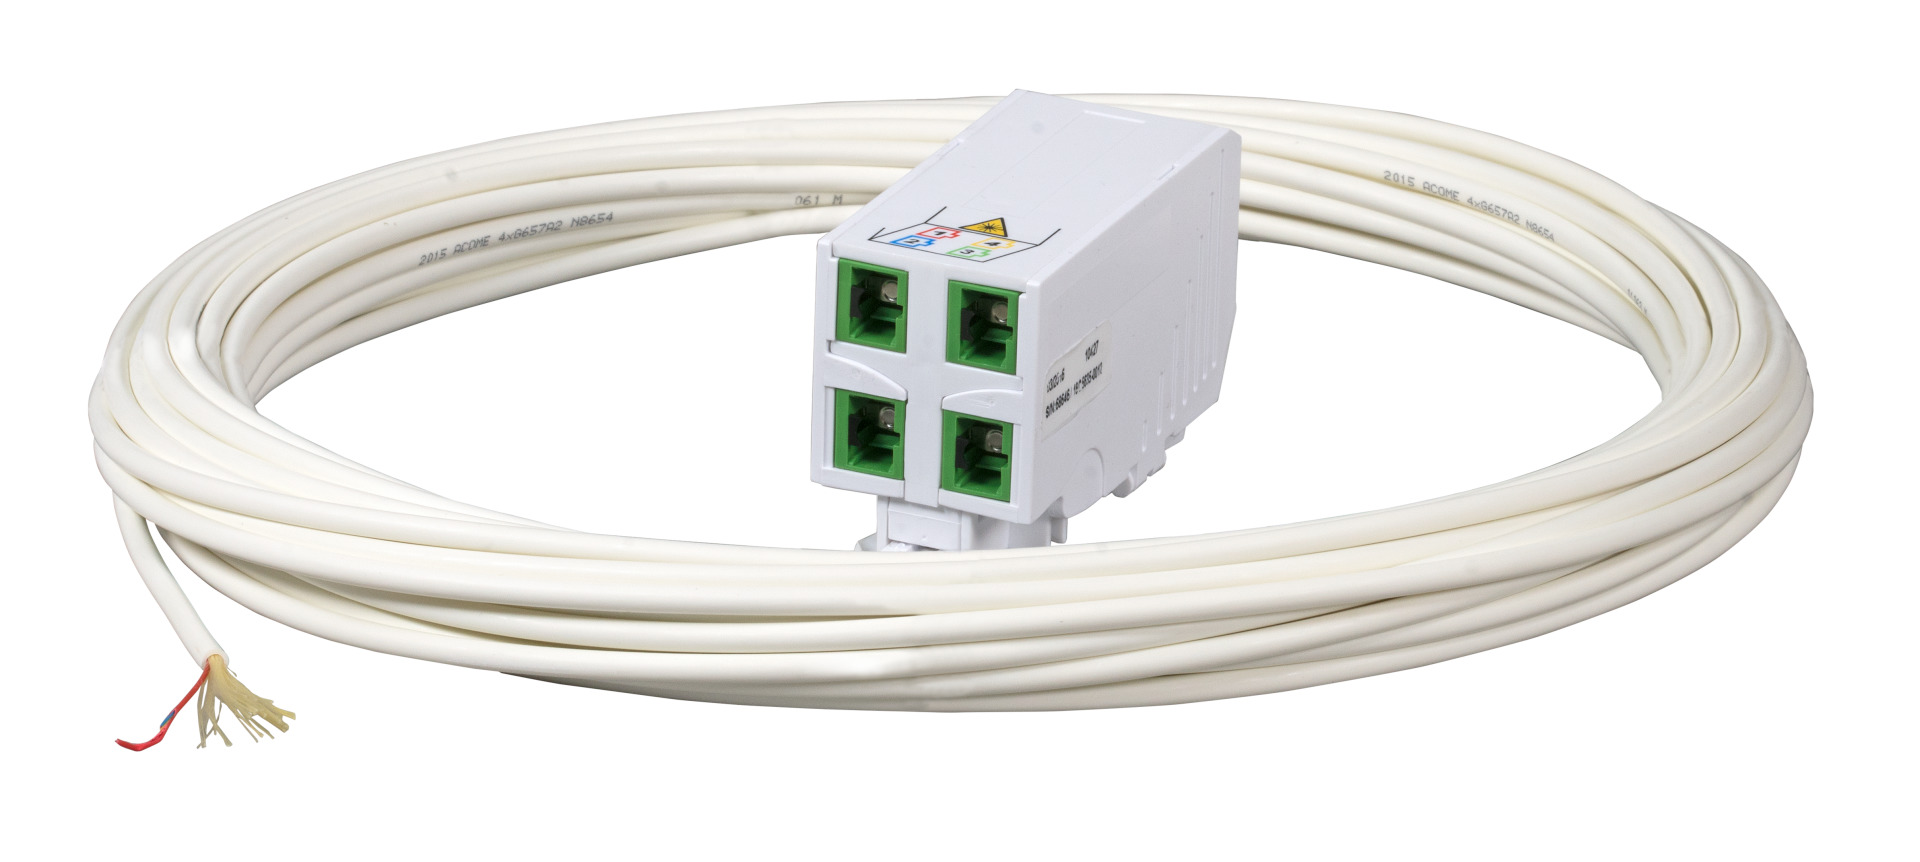 FTTH DIN RAIL Adapter,2x SC/APC adapter, Laserprotection integrated,30m DropCa